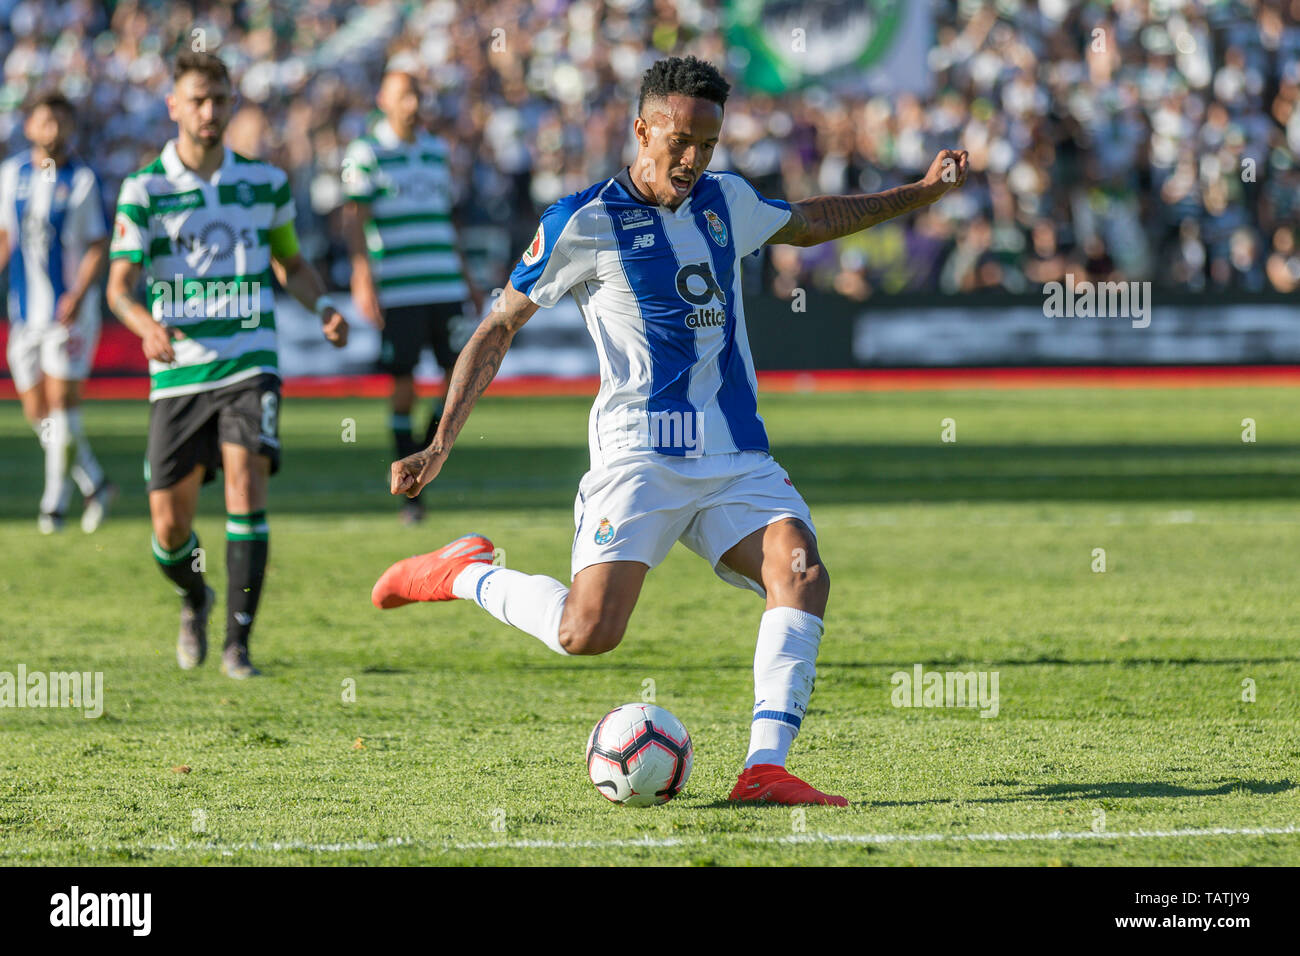 May 25, 2019. Oeiras, Portugal. Porto's defender from Brazil Eder Militao (3) in action during the game Sporting CP vs FC Porto © Alexandre de Sousa/Alamy Live News Stock Photo